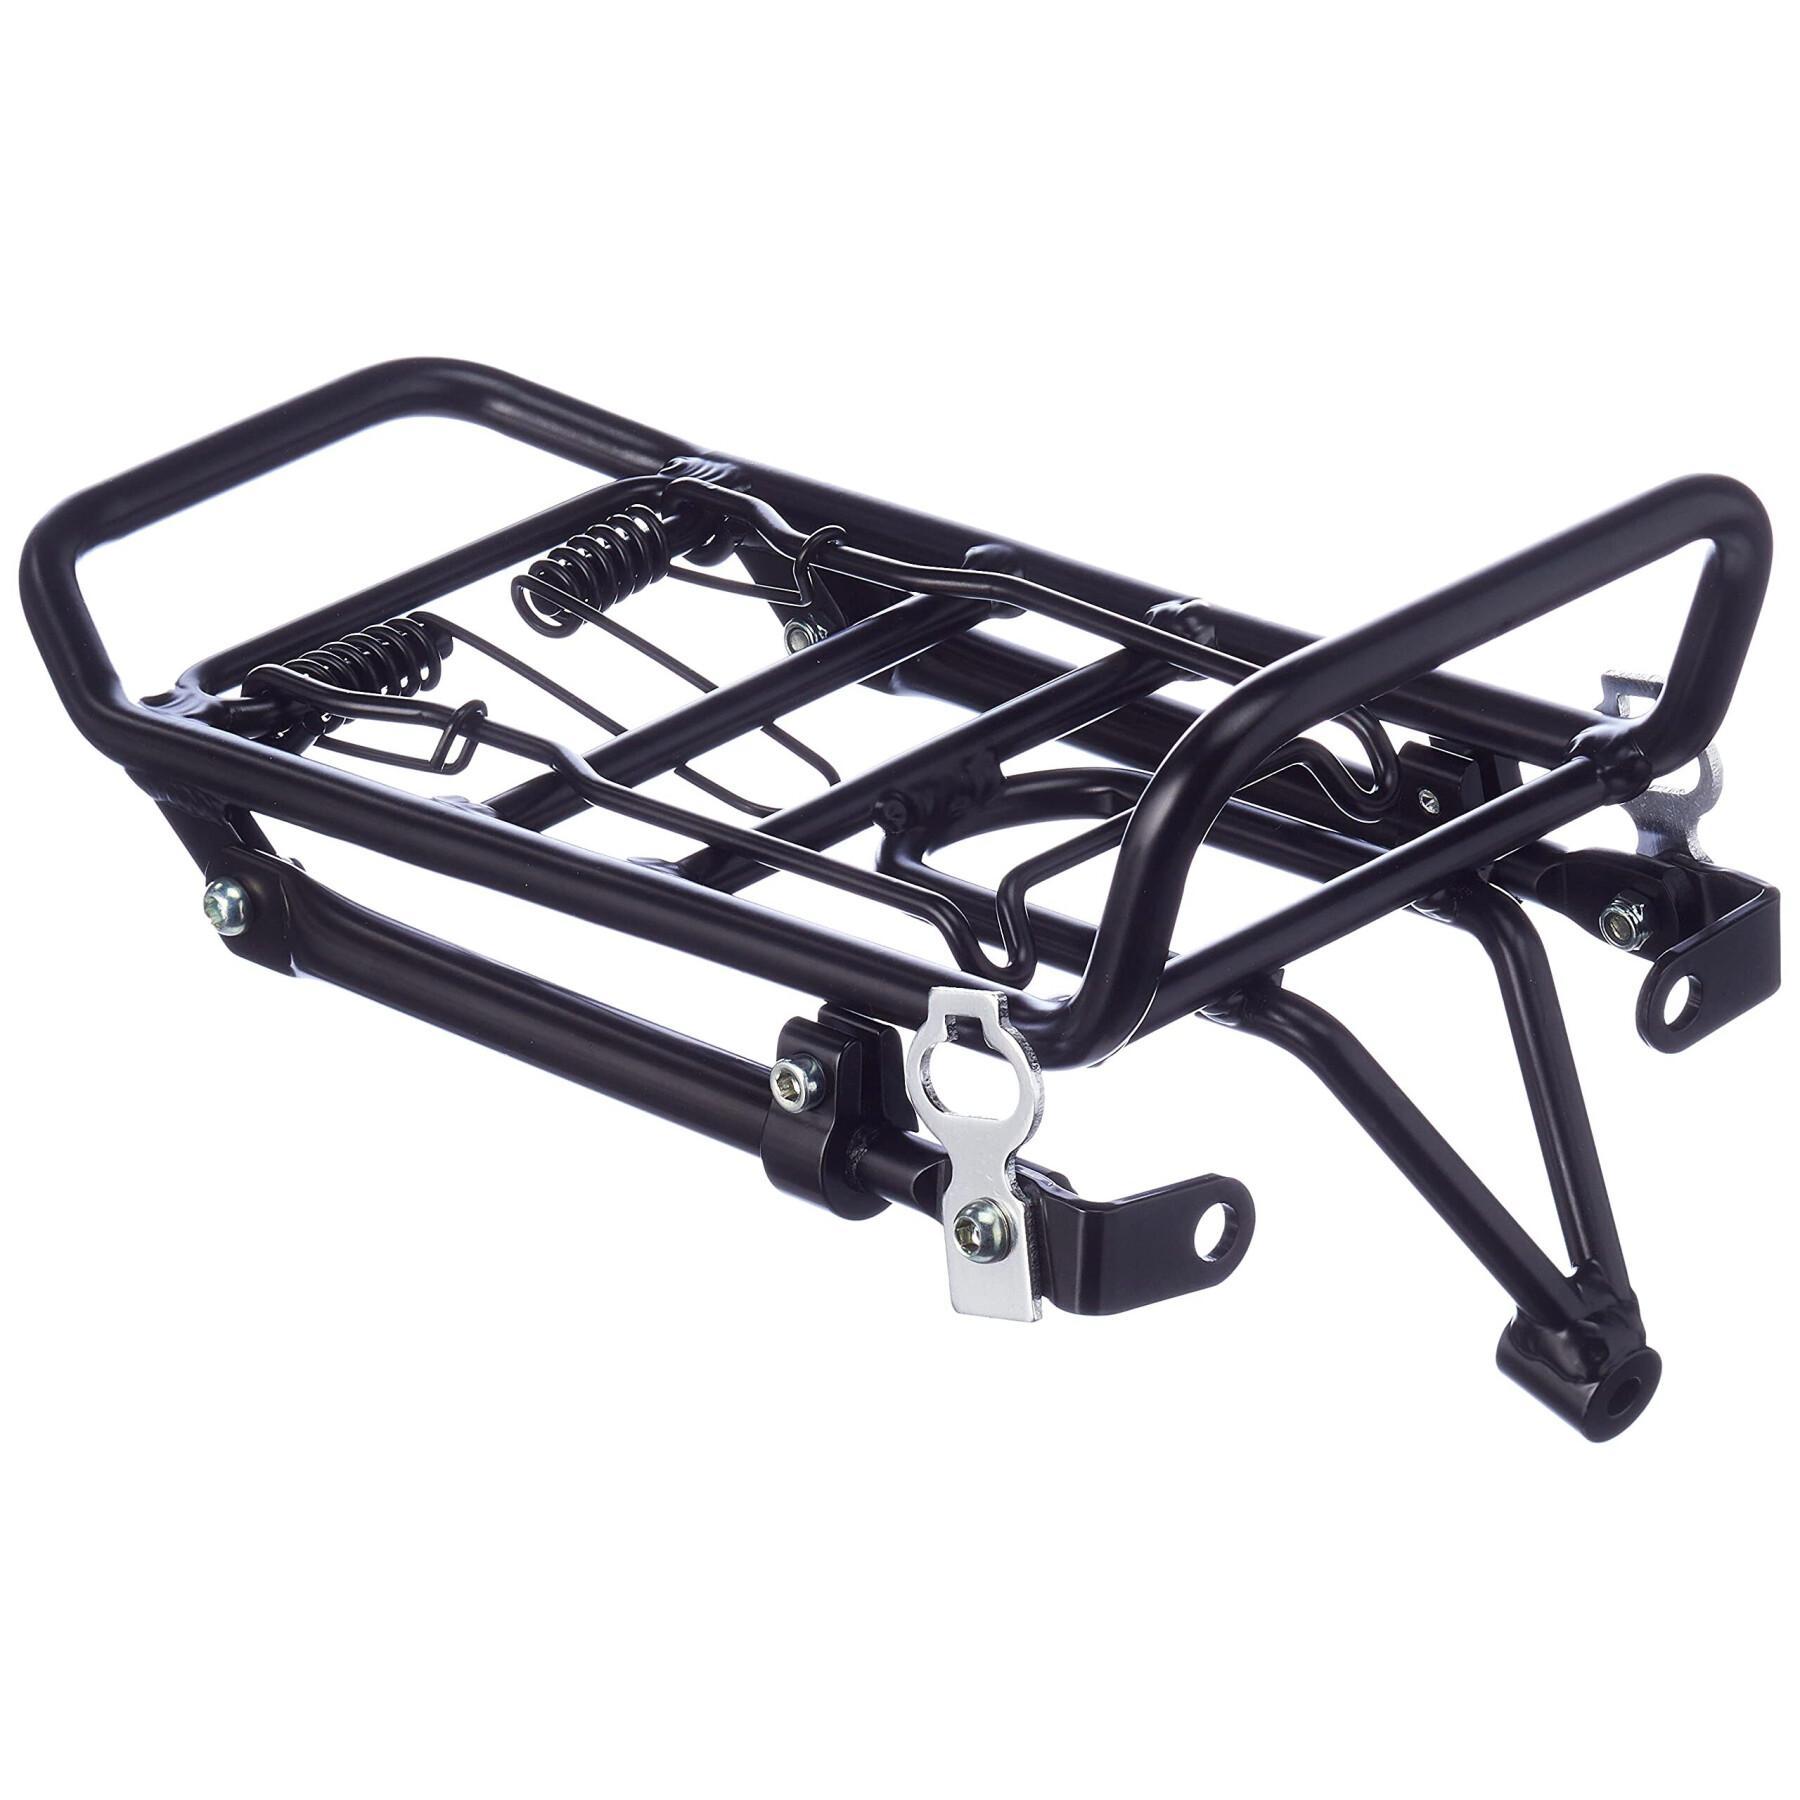 Luggage rack with front brake attachment Ostand